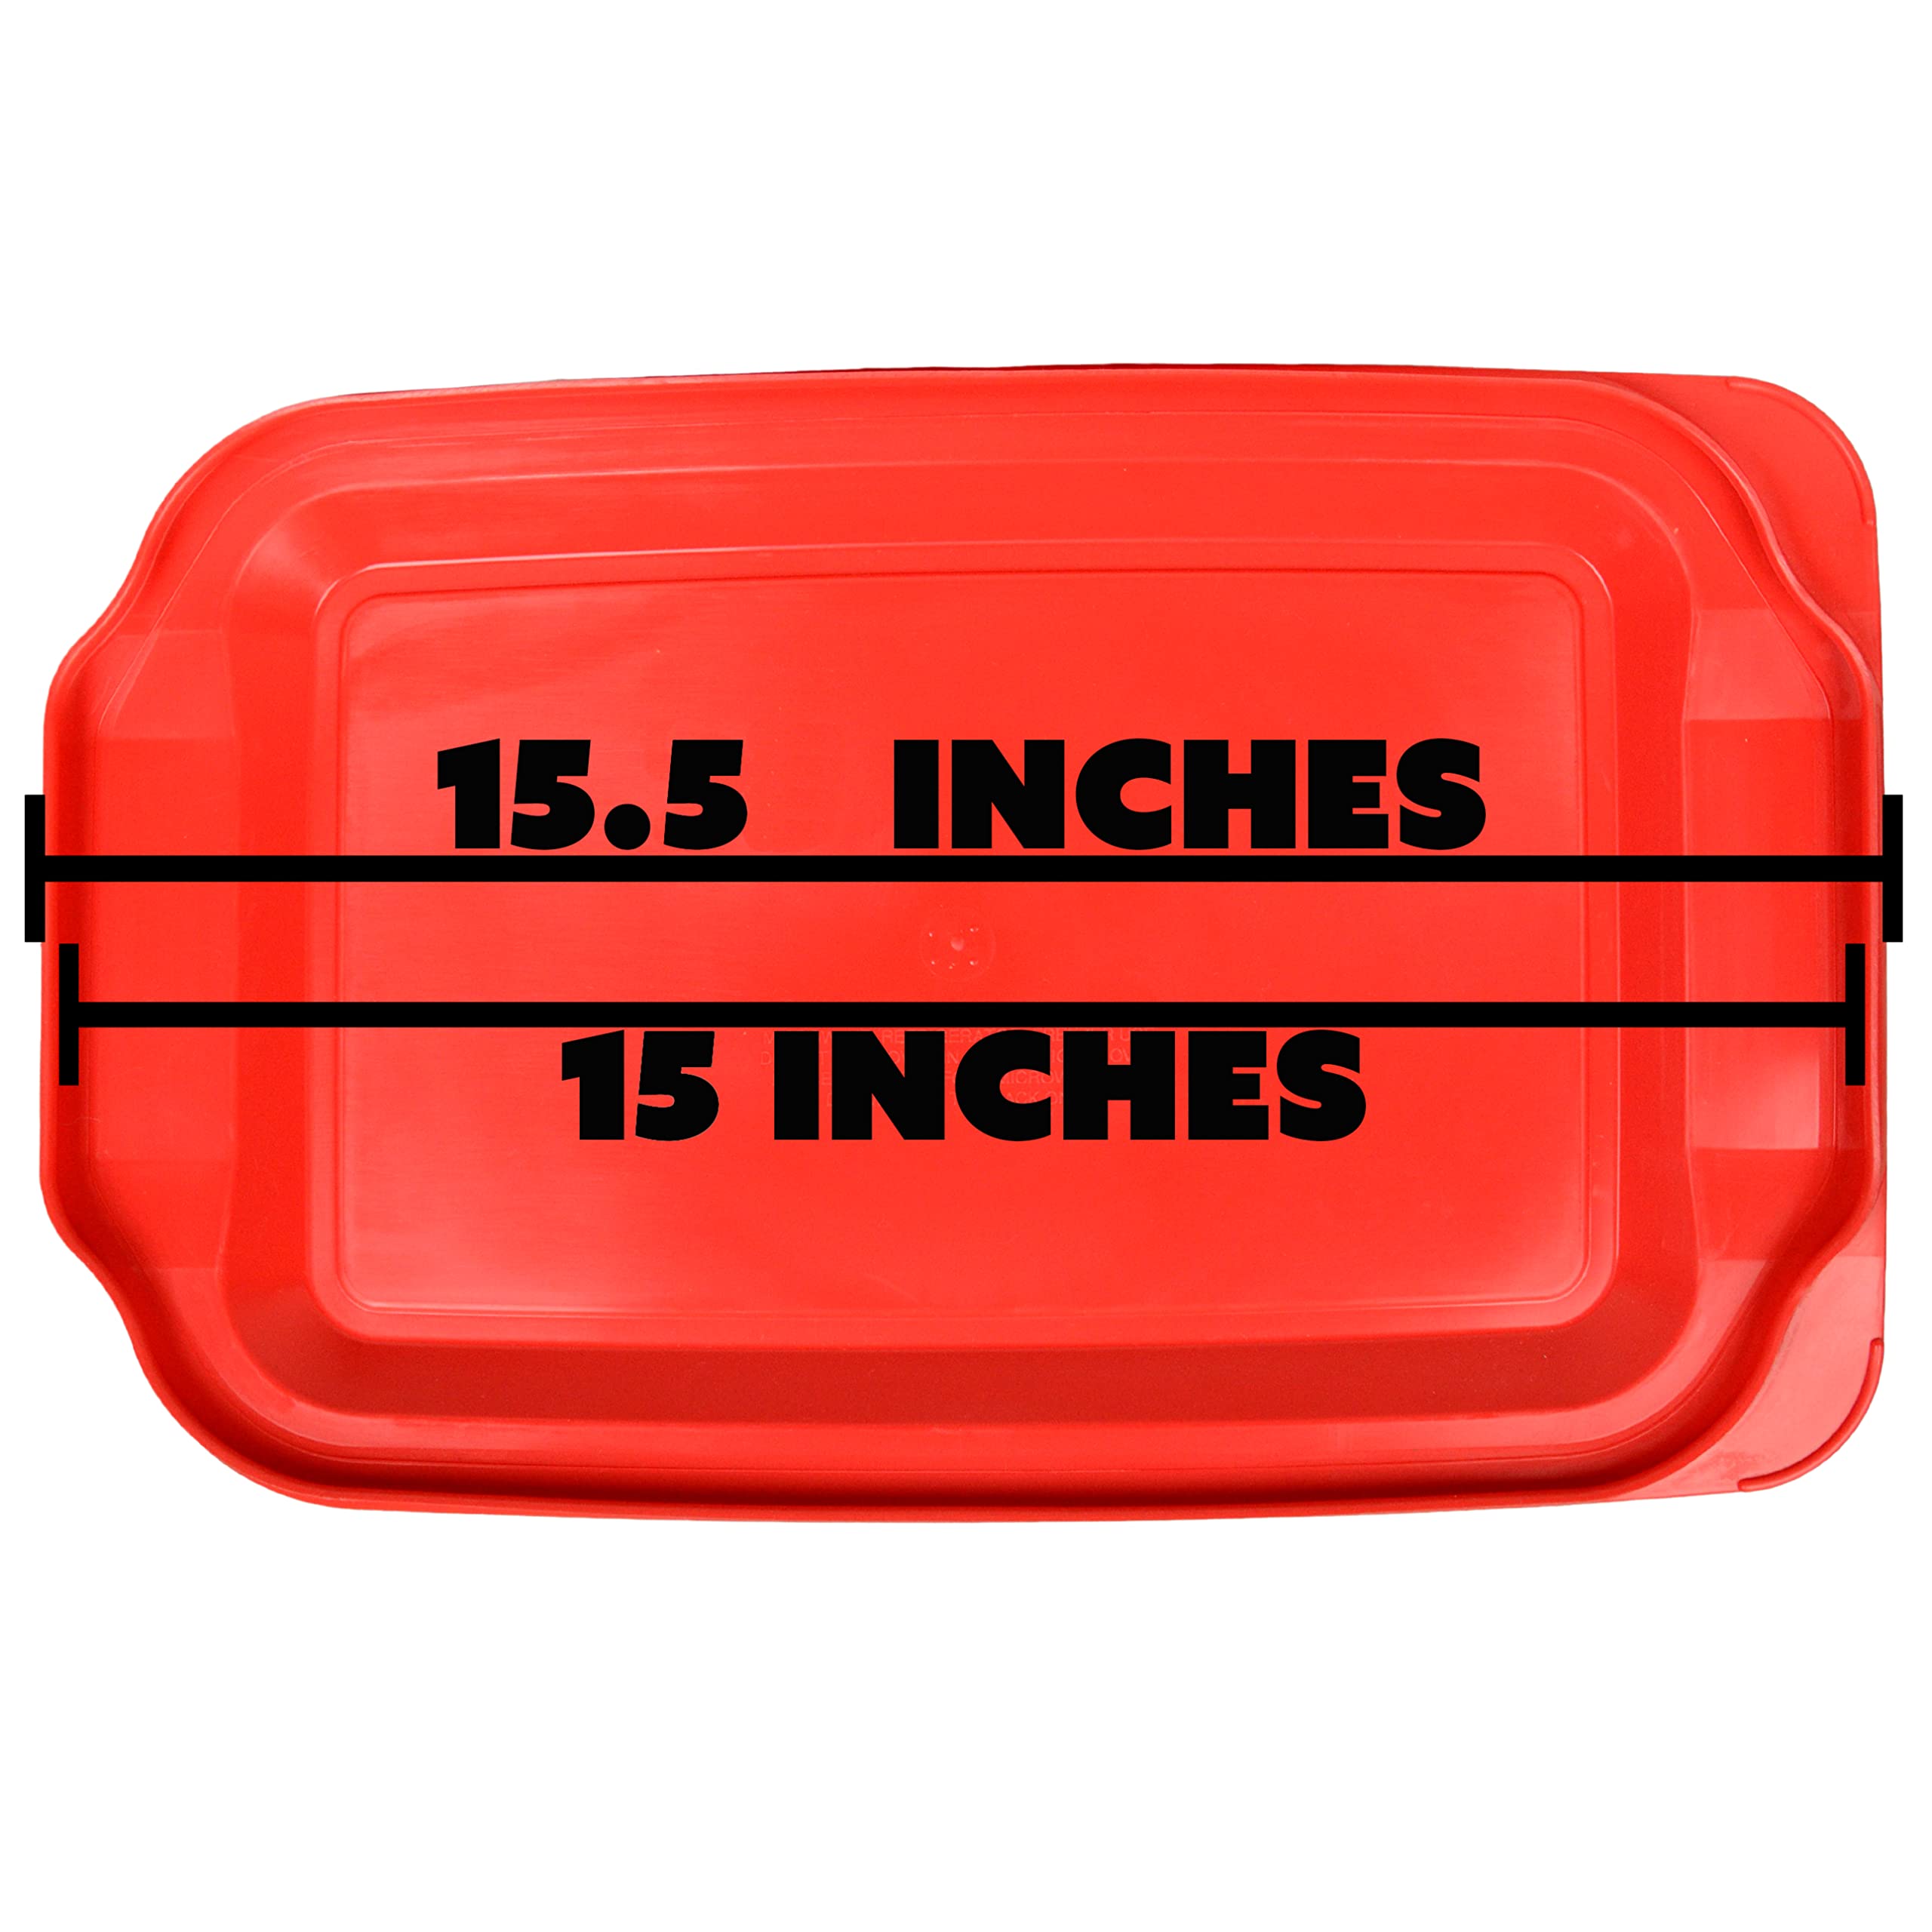 Pyrex 233-PC 3qt Red Replacement Food Storage Lid, (Only Fits Pyrex 233 Glass Dish NOT Pyrex C-233 Dish) Made in the USA